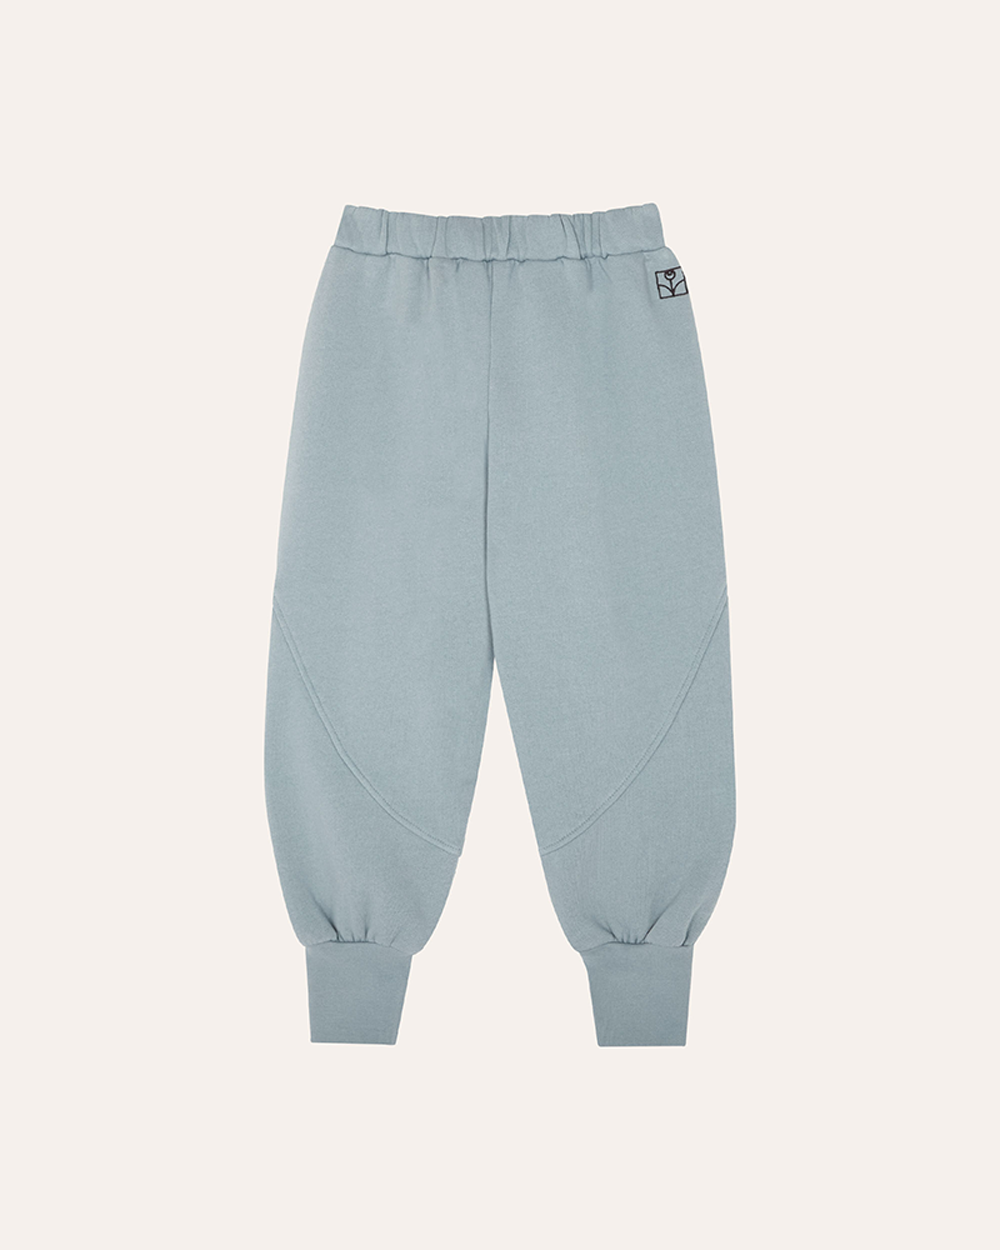 [ THE CAMPAMENTO ] LIGHT BLUE KIDS JOGGING TROUSERS [4y, 9-10y]